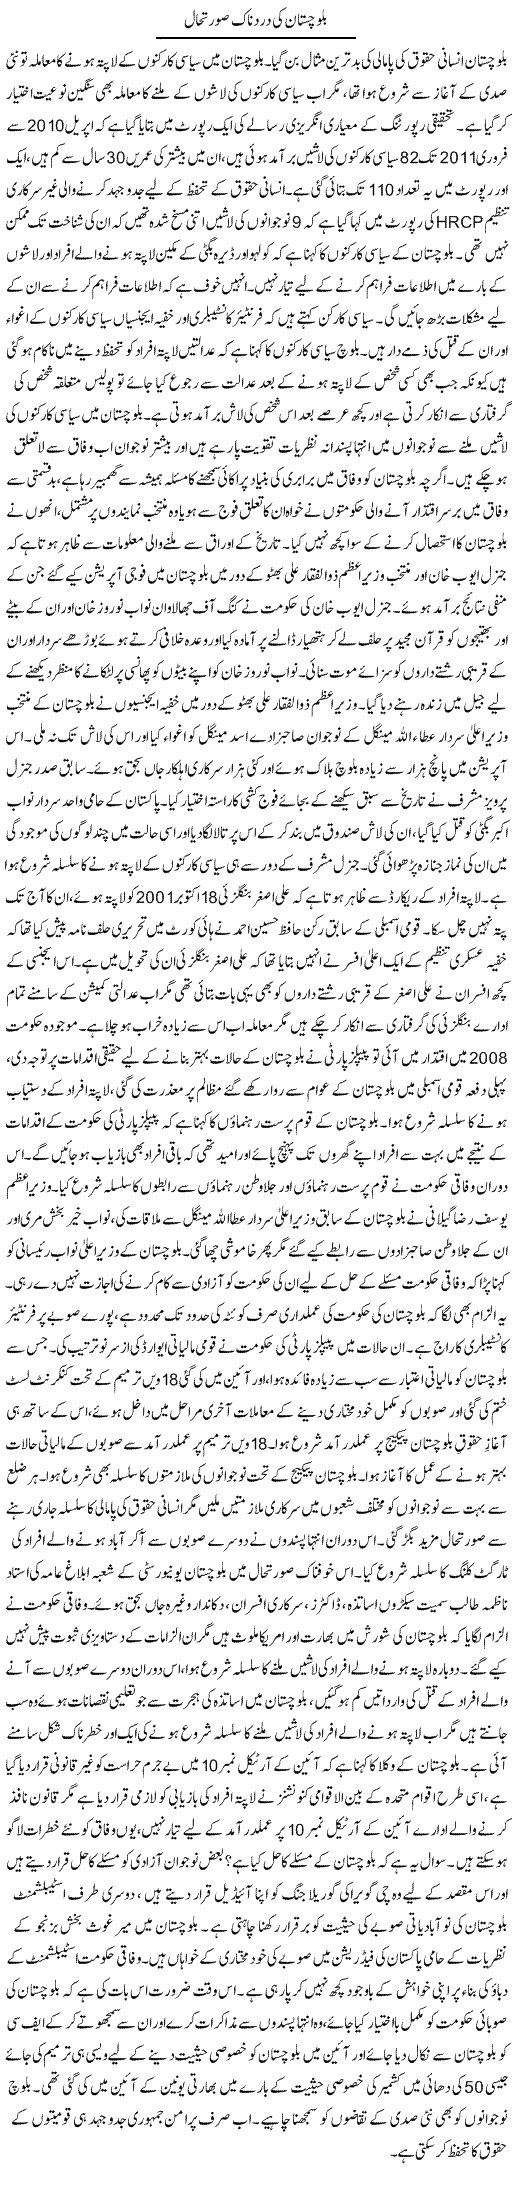 Balochistan Situation Express Column Tauseef Ahmed 26 March 2011